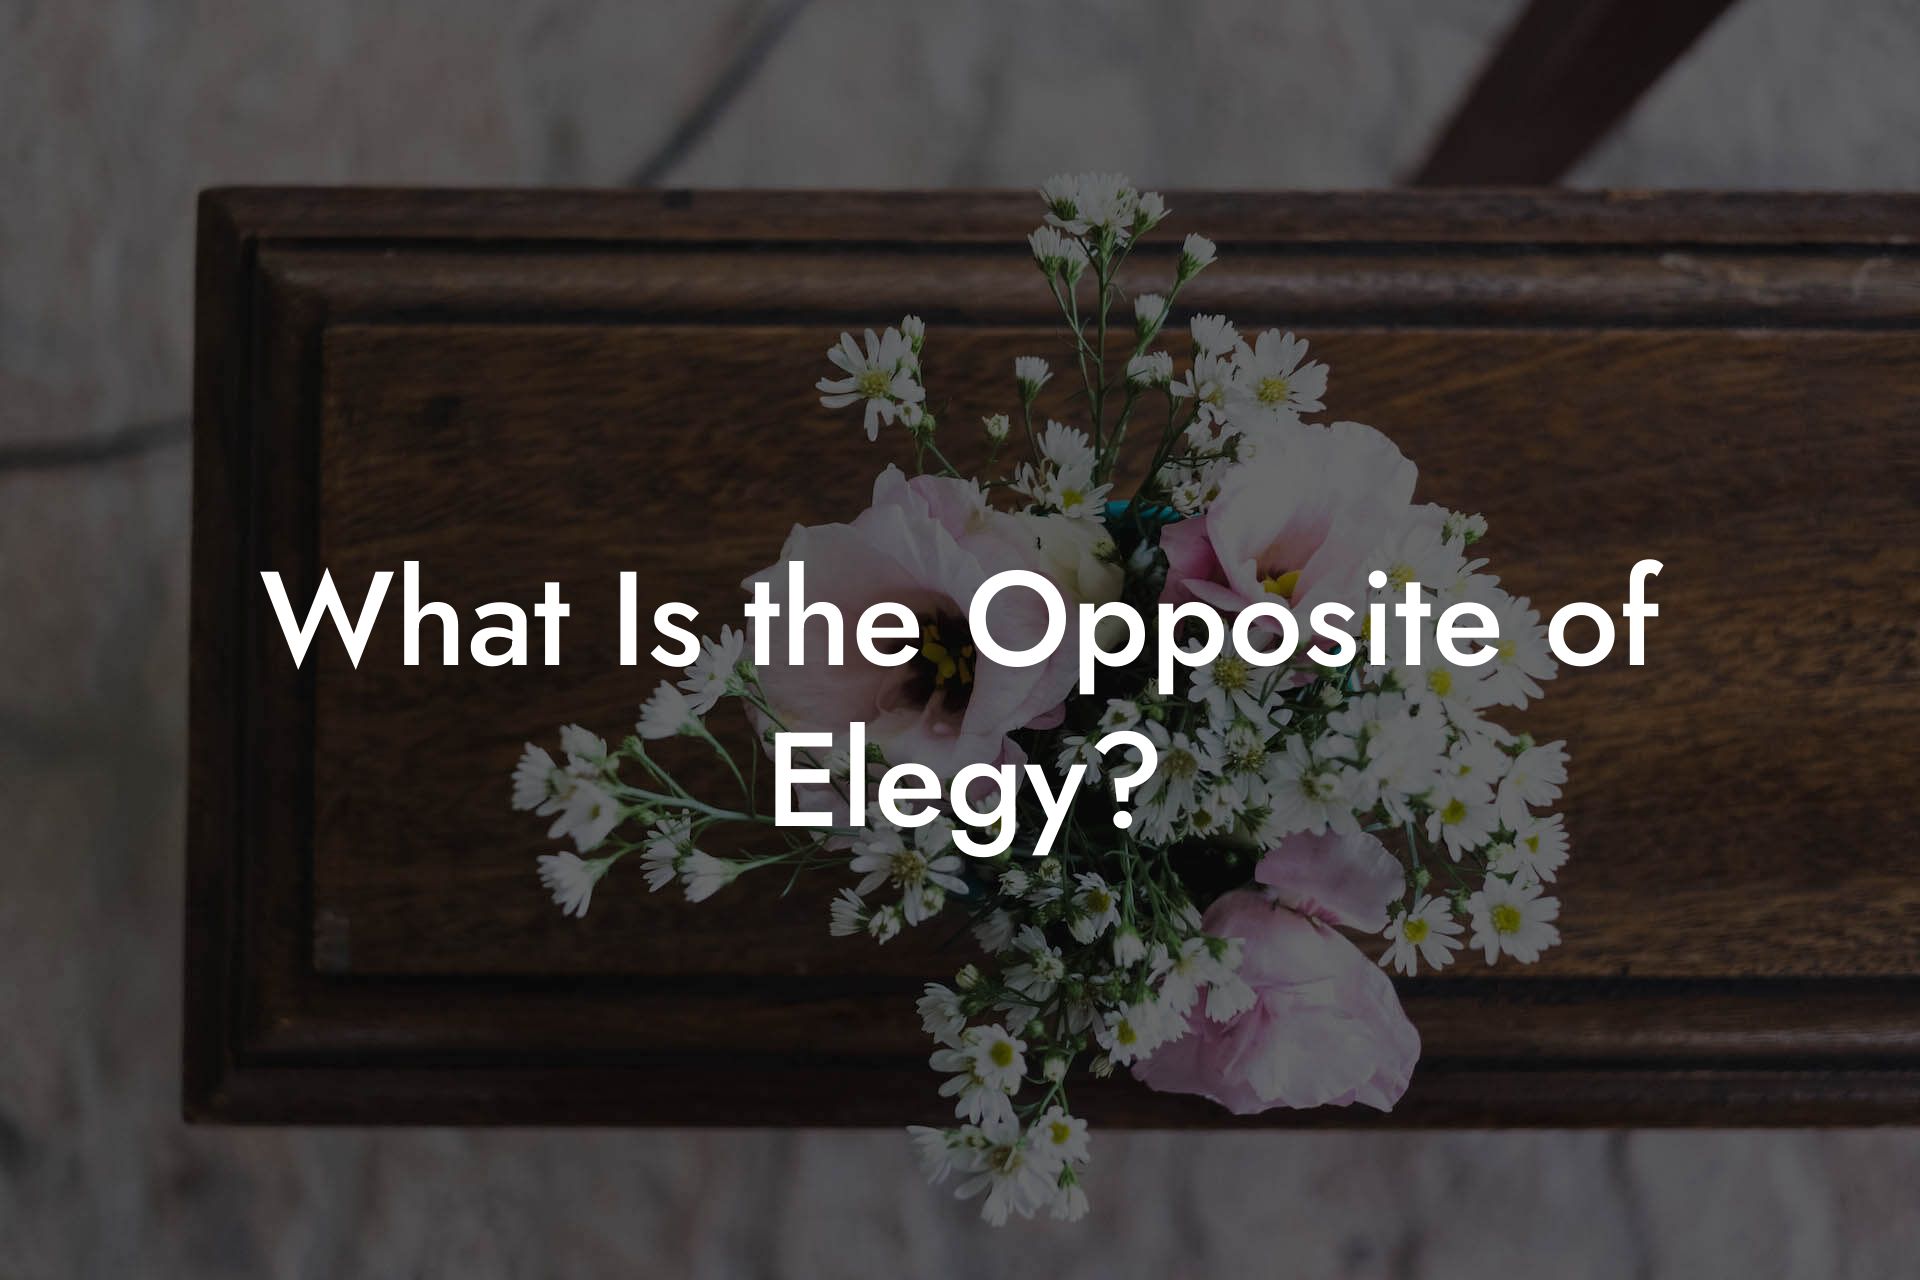 What Is the Opposite of Elegy?